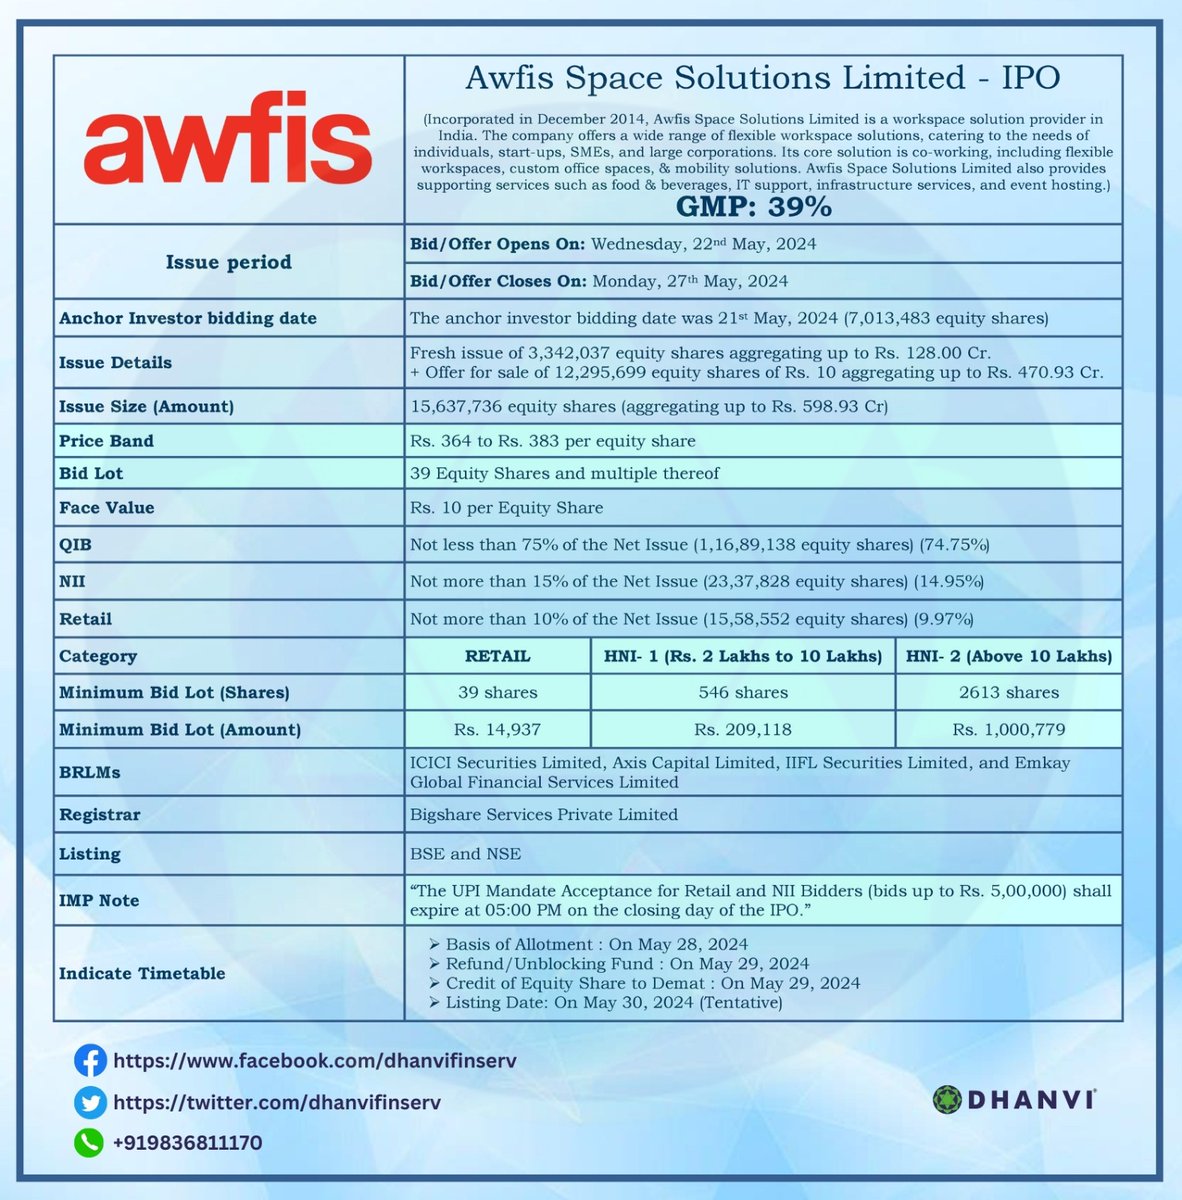 Awfis Space Solutions Limited - IPO 👇

#dhanvifinserv #newipo #InvestNow #initialpublicoffering #InitialPublicOffer  #IPO #bidforfpo #stockmarketindia #business #market #investment #trading #Dhanvi #AwfisSpaceSolutions #stocks #InvestmentOpportunities